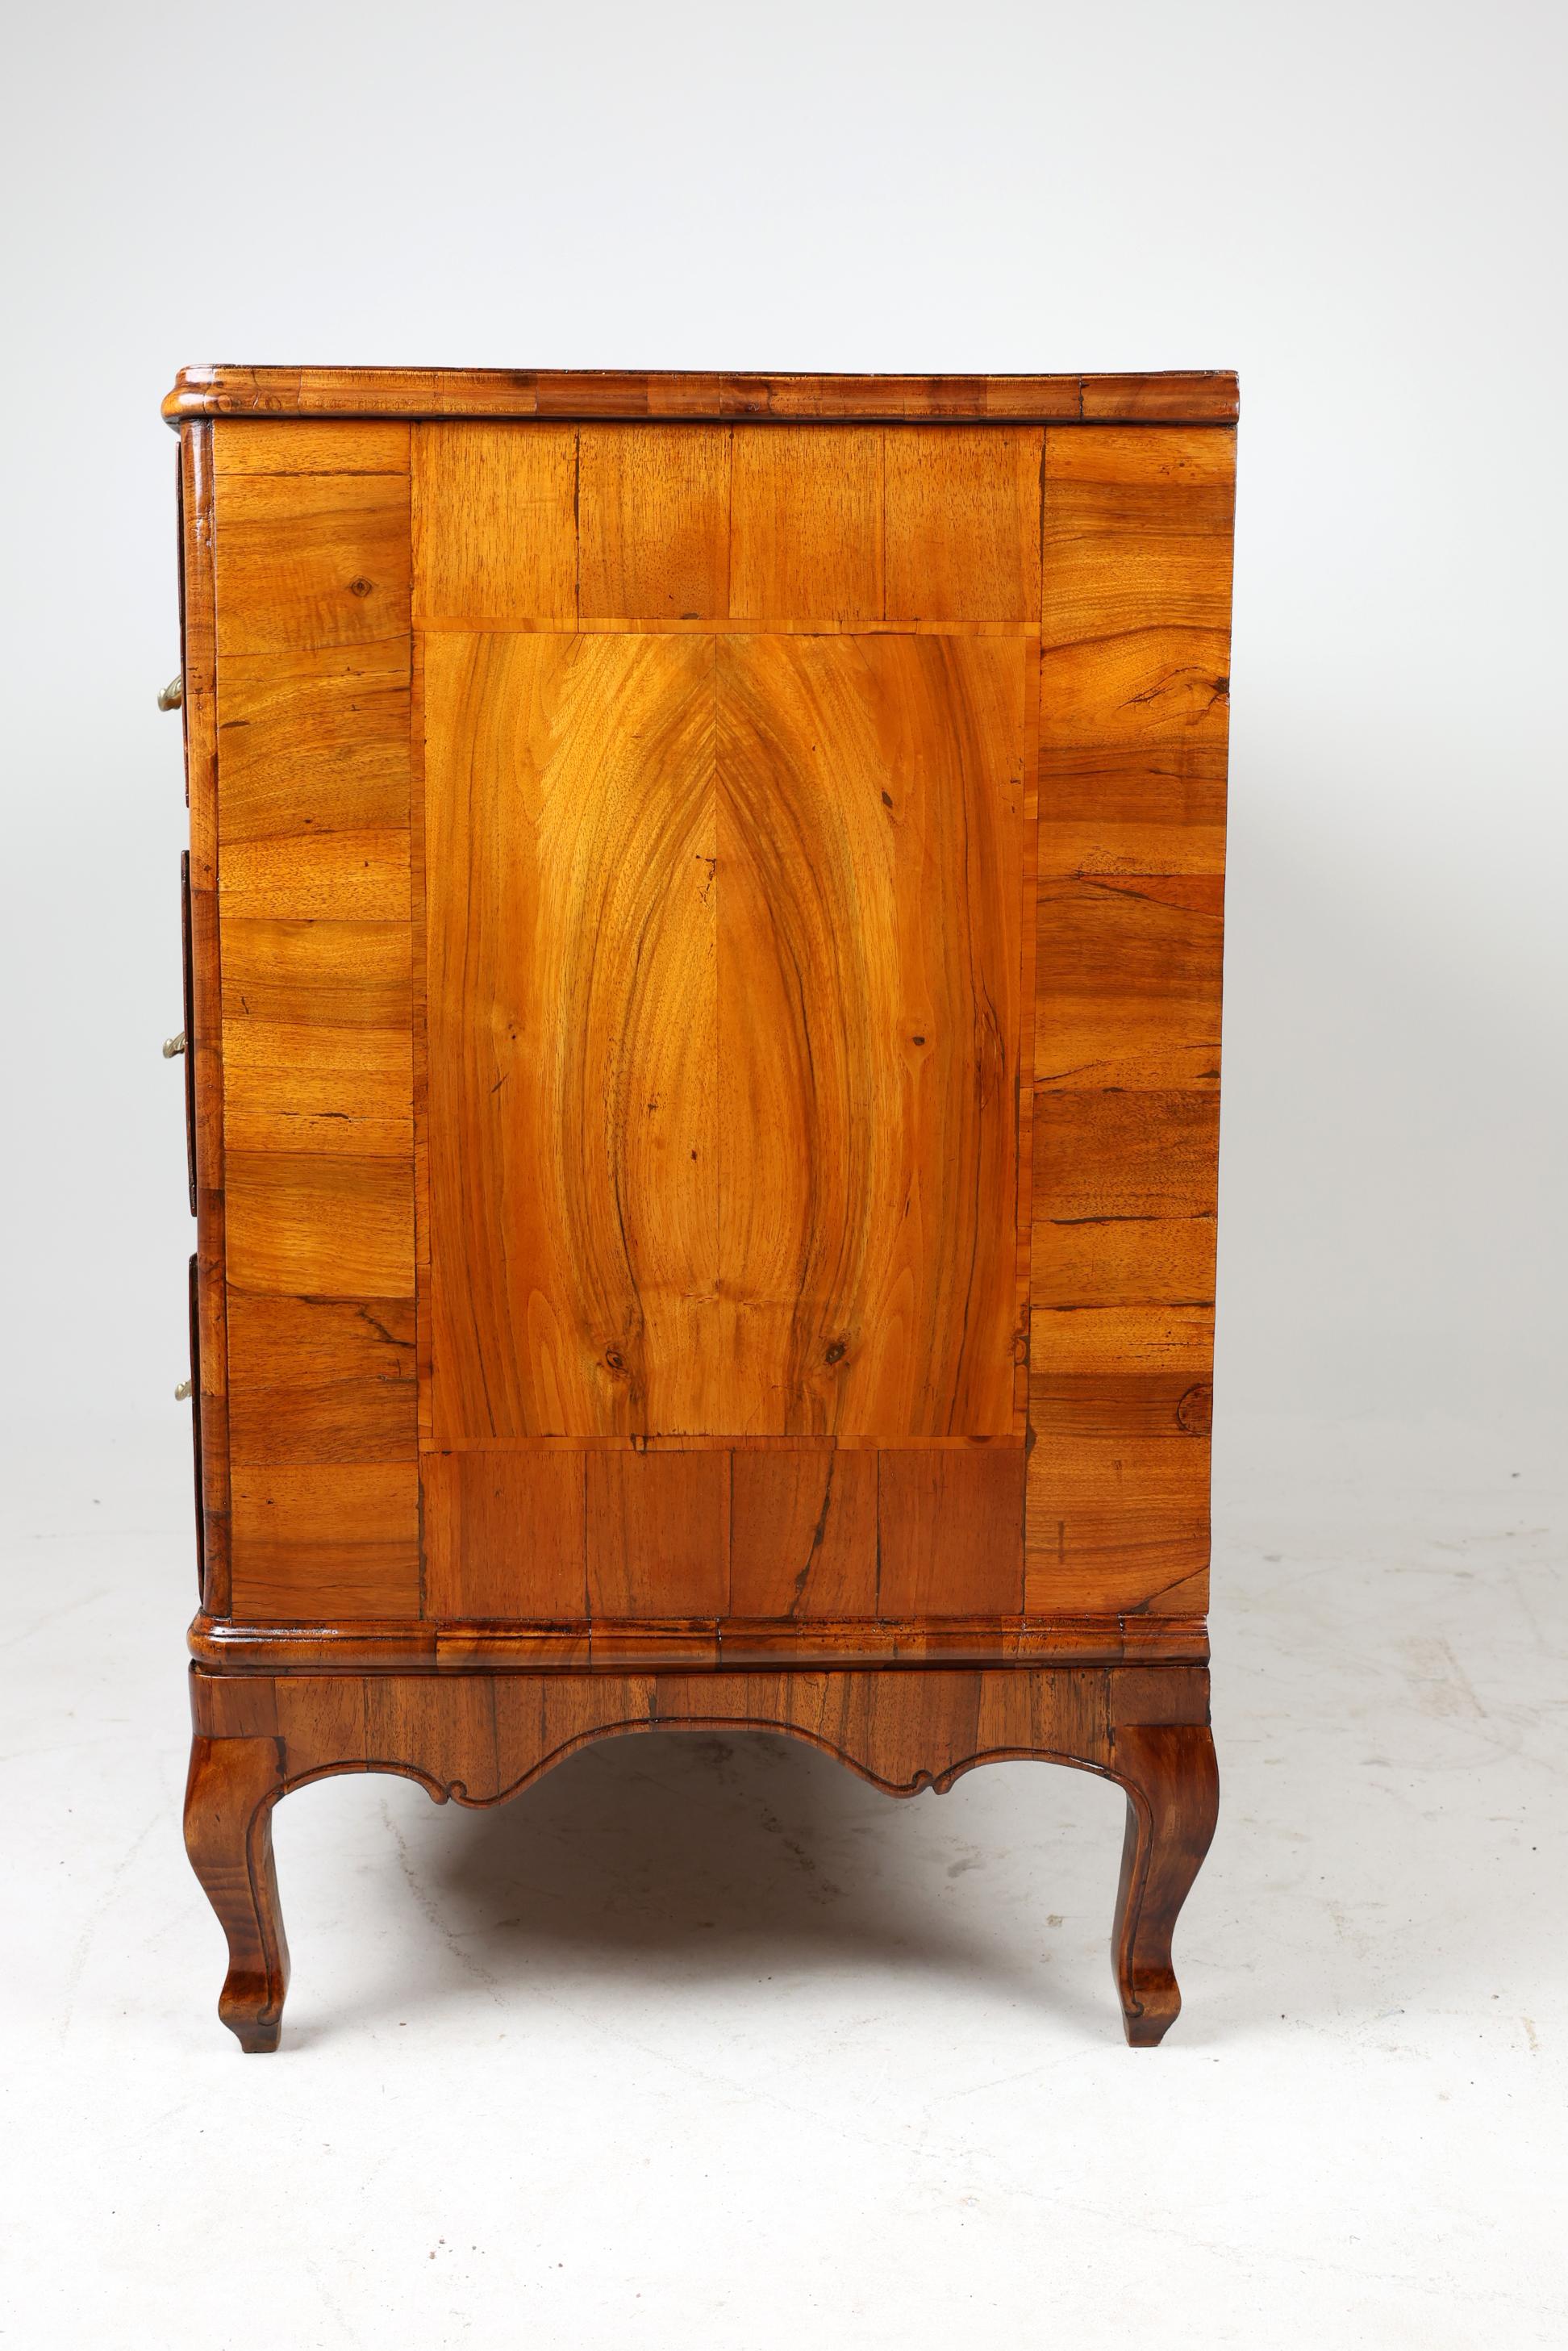 Late 18th Century Baroque Commode with Burl Walnut For Sale 2